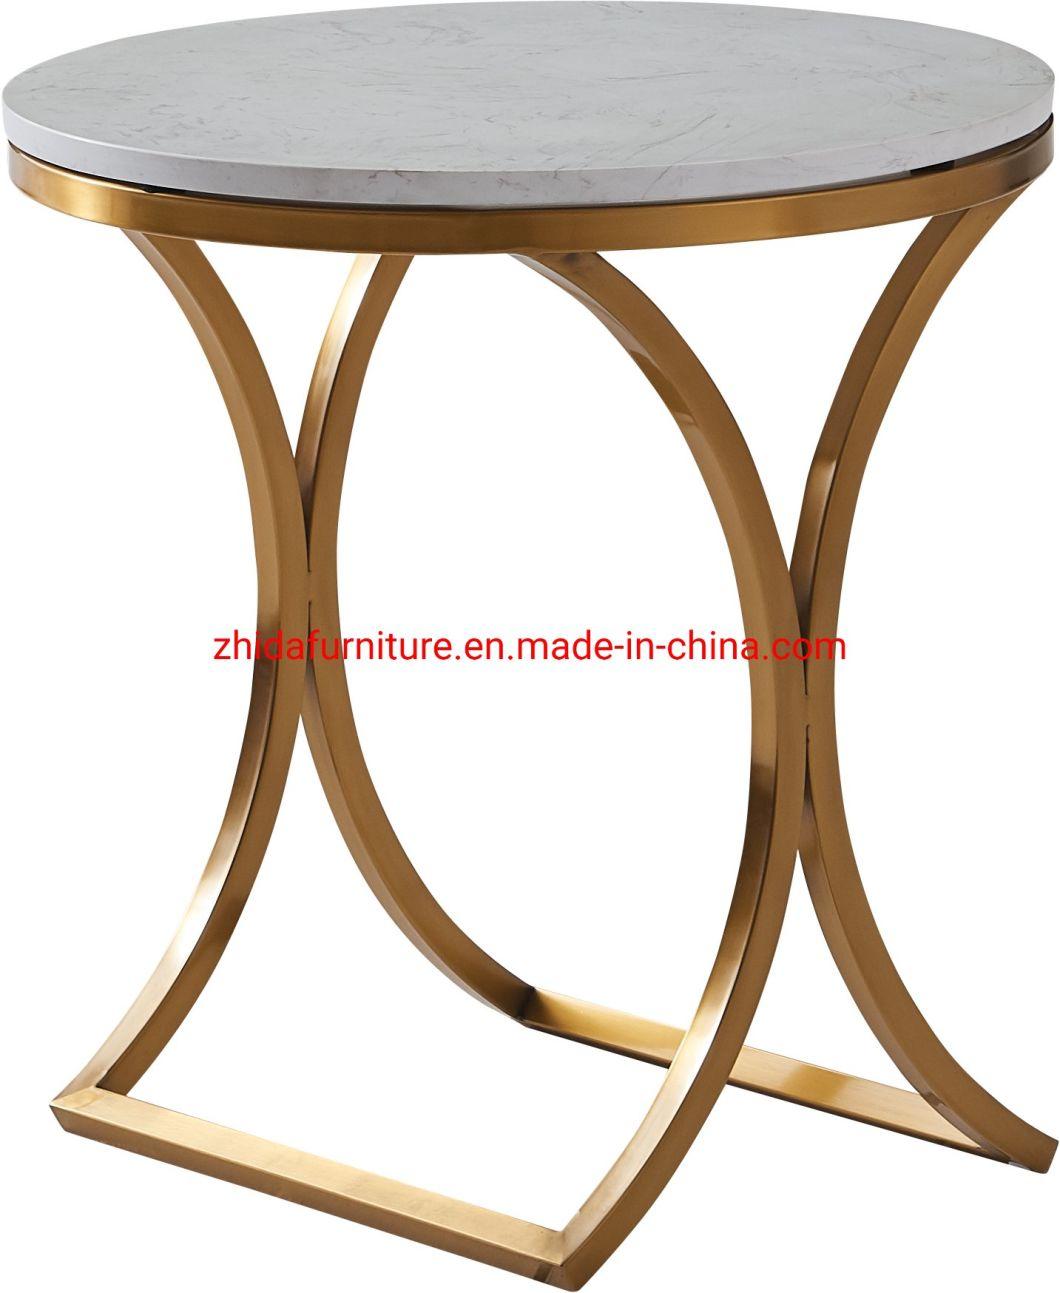 Luxury Living Room Home Furniture Marble Top Golden Leg Tea Coffee Table for Home Villa Hotel Apartment Furniture